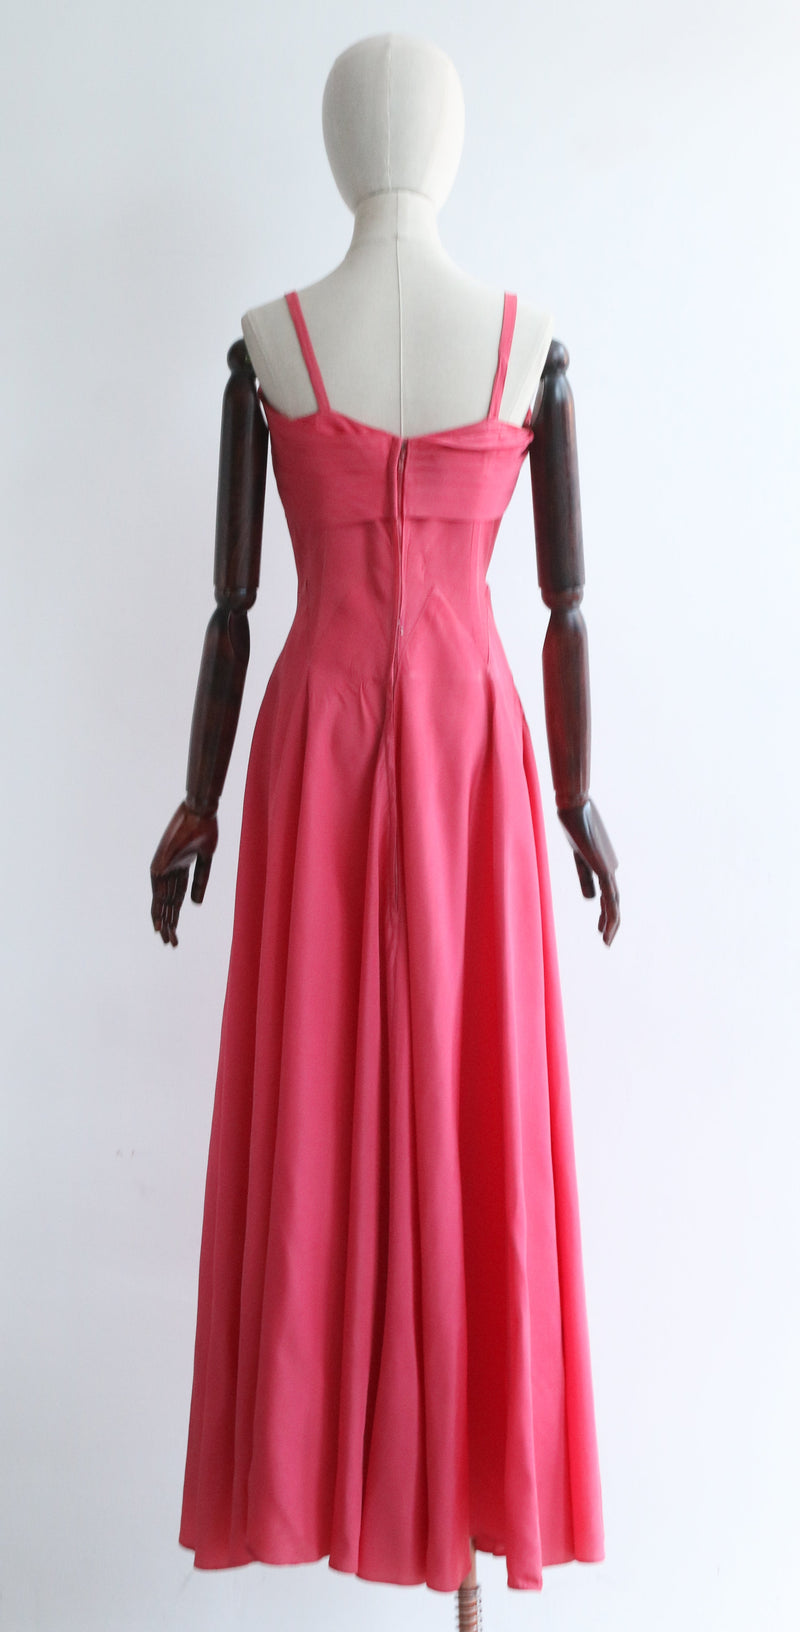 "Coral Pink Points" Vintage 1940's Coral Pink Pointed Seam Evening Dress UK 10 US 6